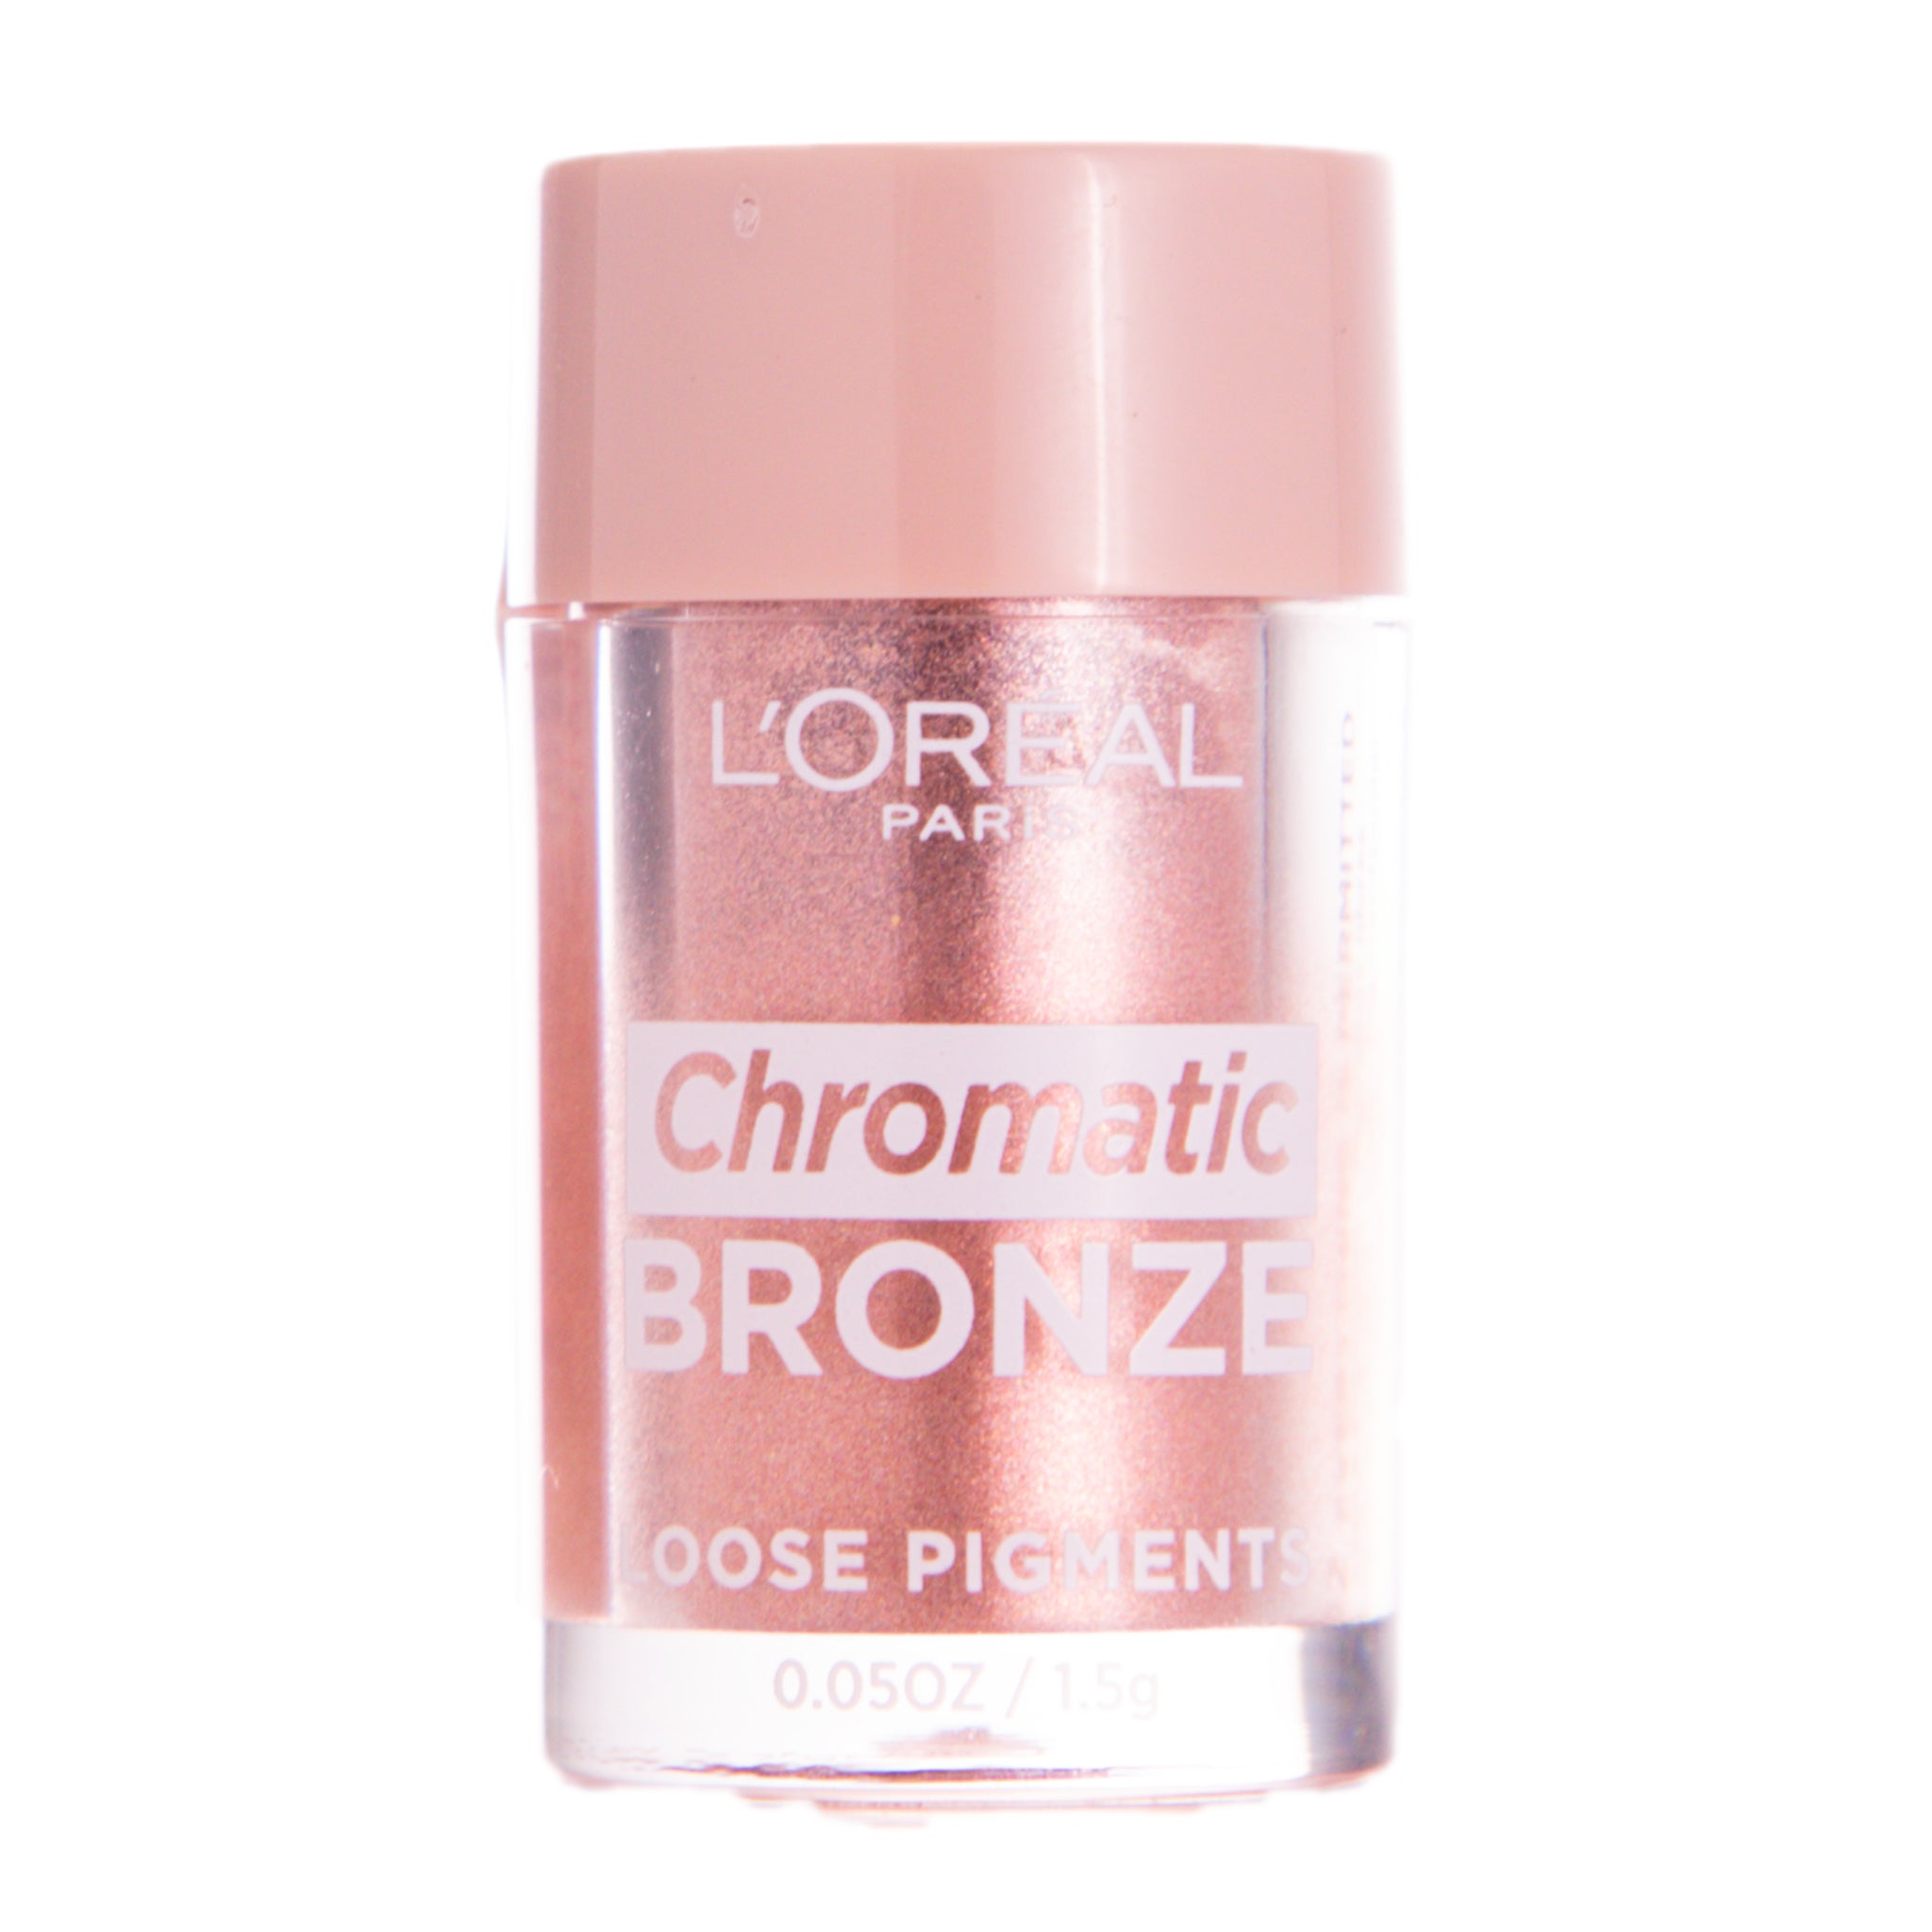 L'Oreal Chromatic Bronze Loose Pigment - 02 Everything is Permitted